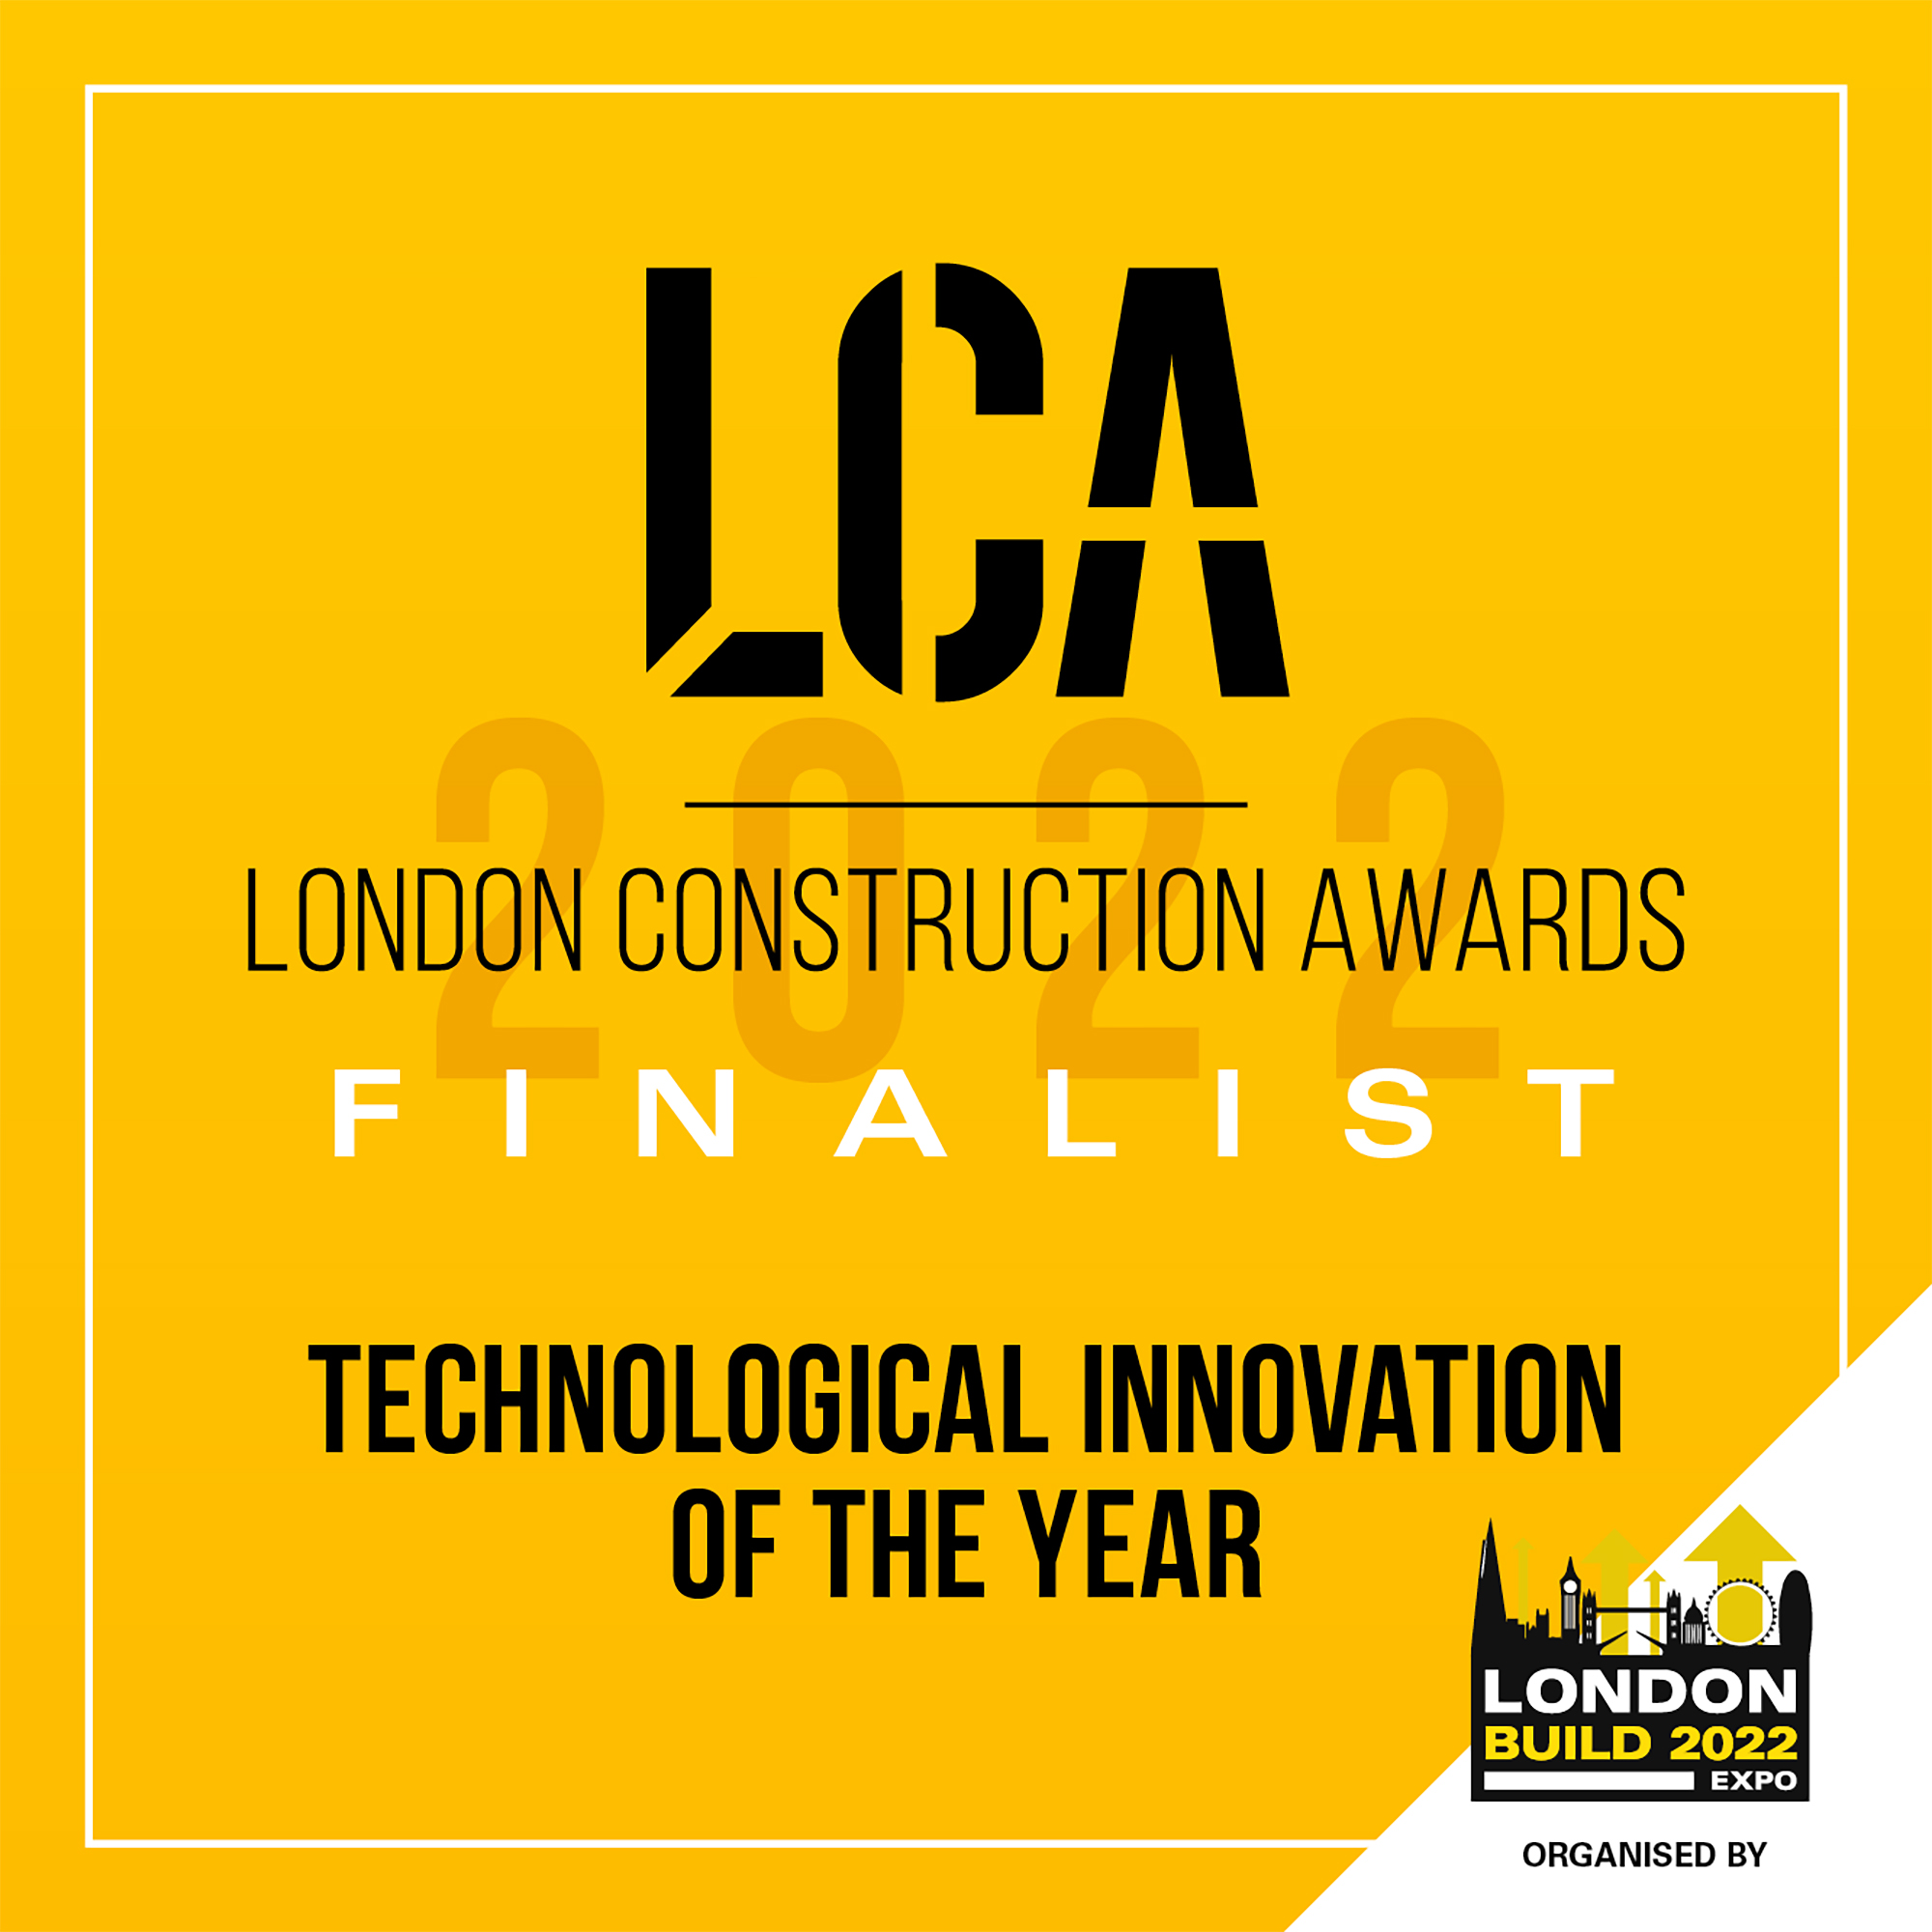 ECS nominated for Technical Innovation of the Year at The London Construction Awards